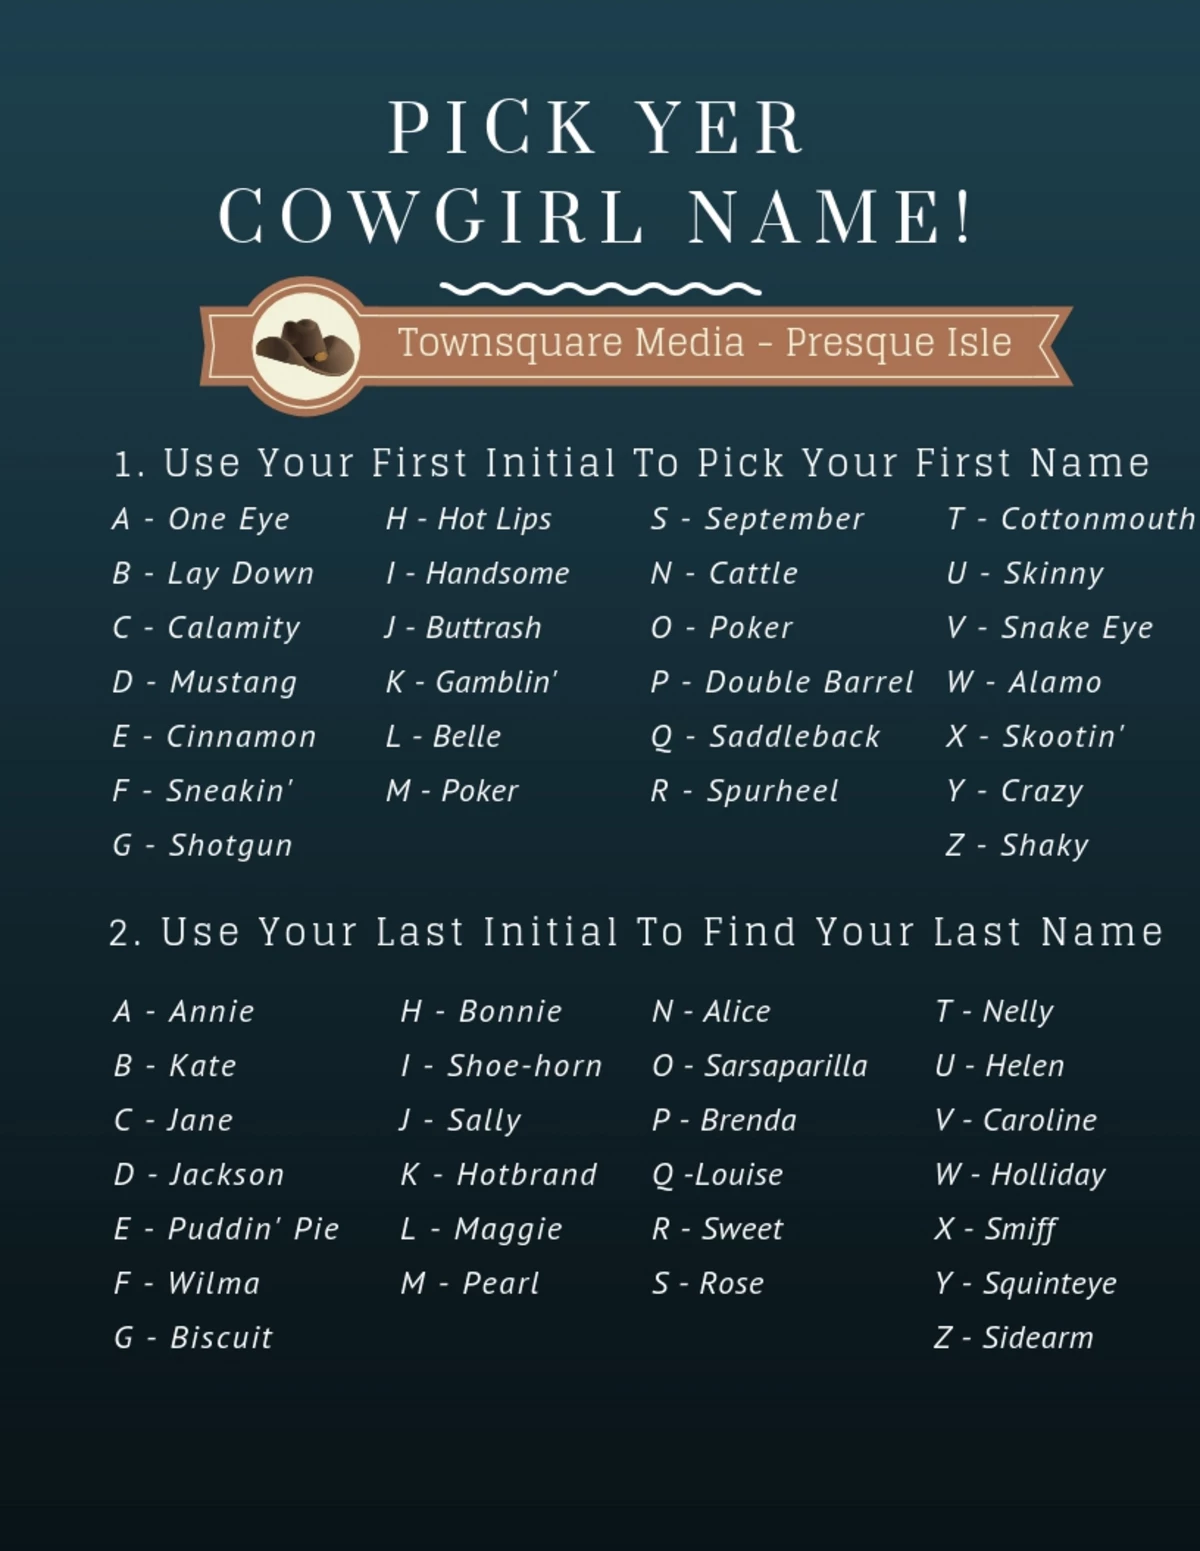 Find Your Cowgirl Name Here Just In Time For Boots N' Bulls!